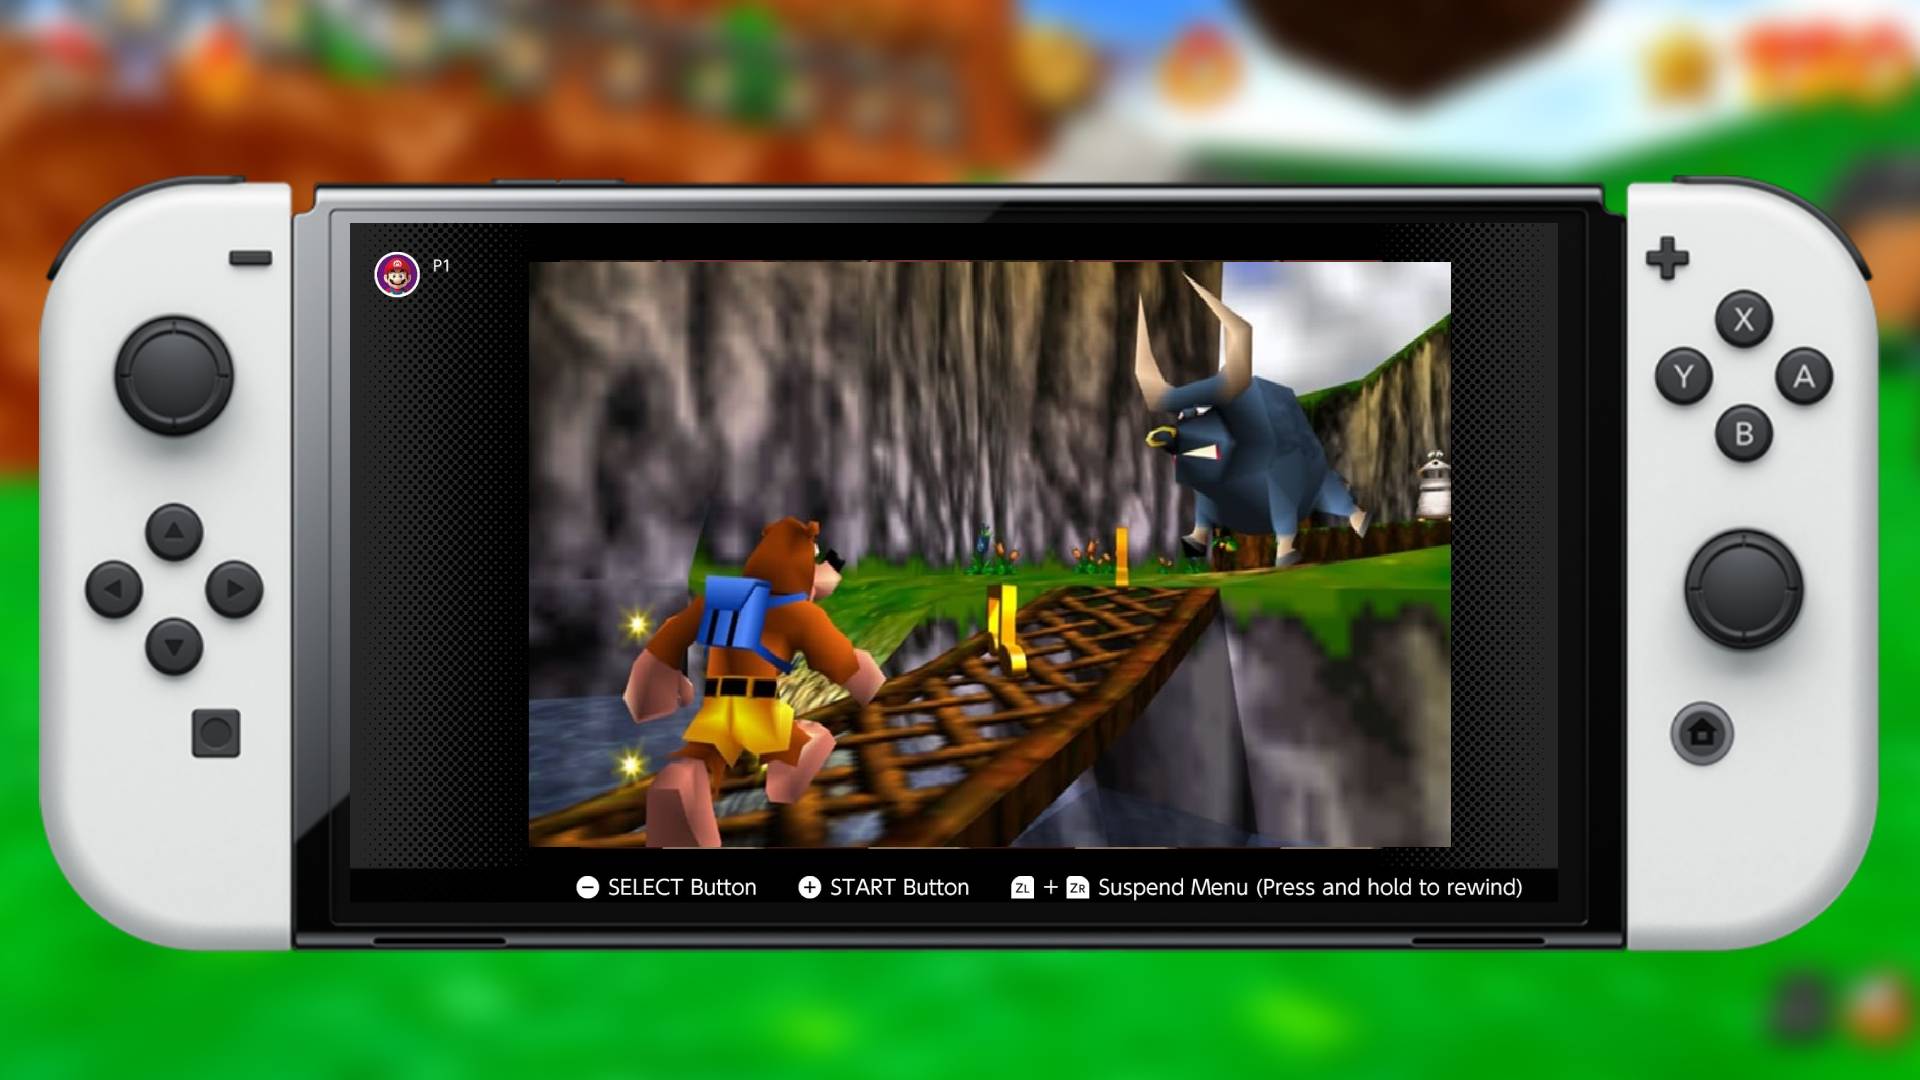 Banjo-Kazooie is Available Now for Nintendo Switch Online